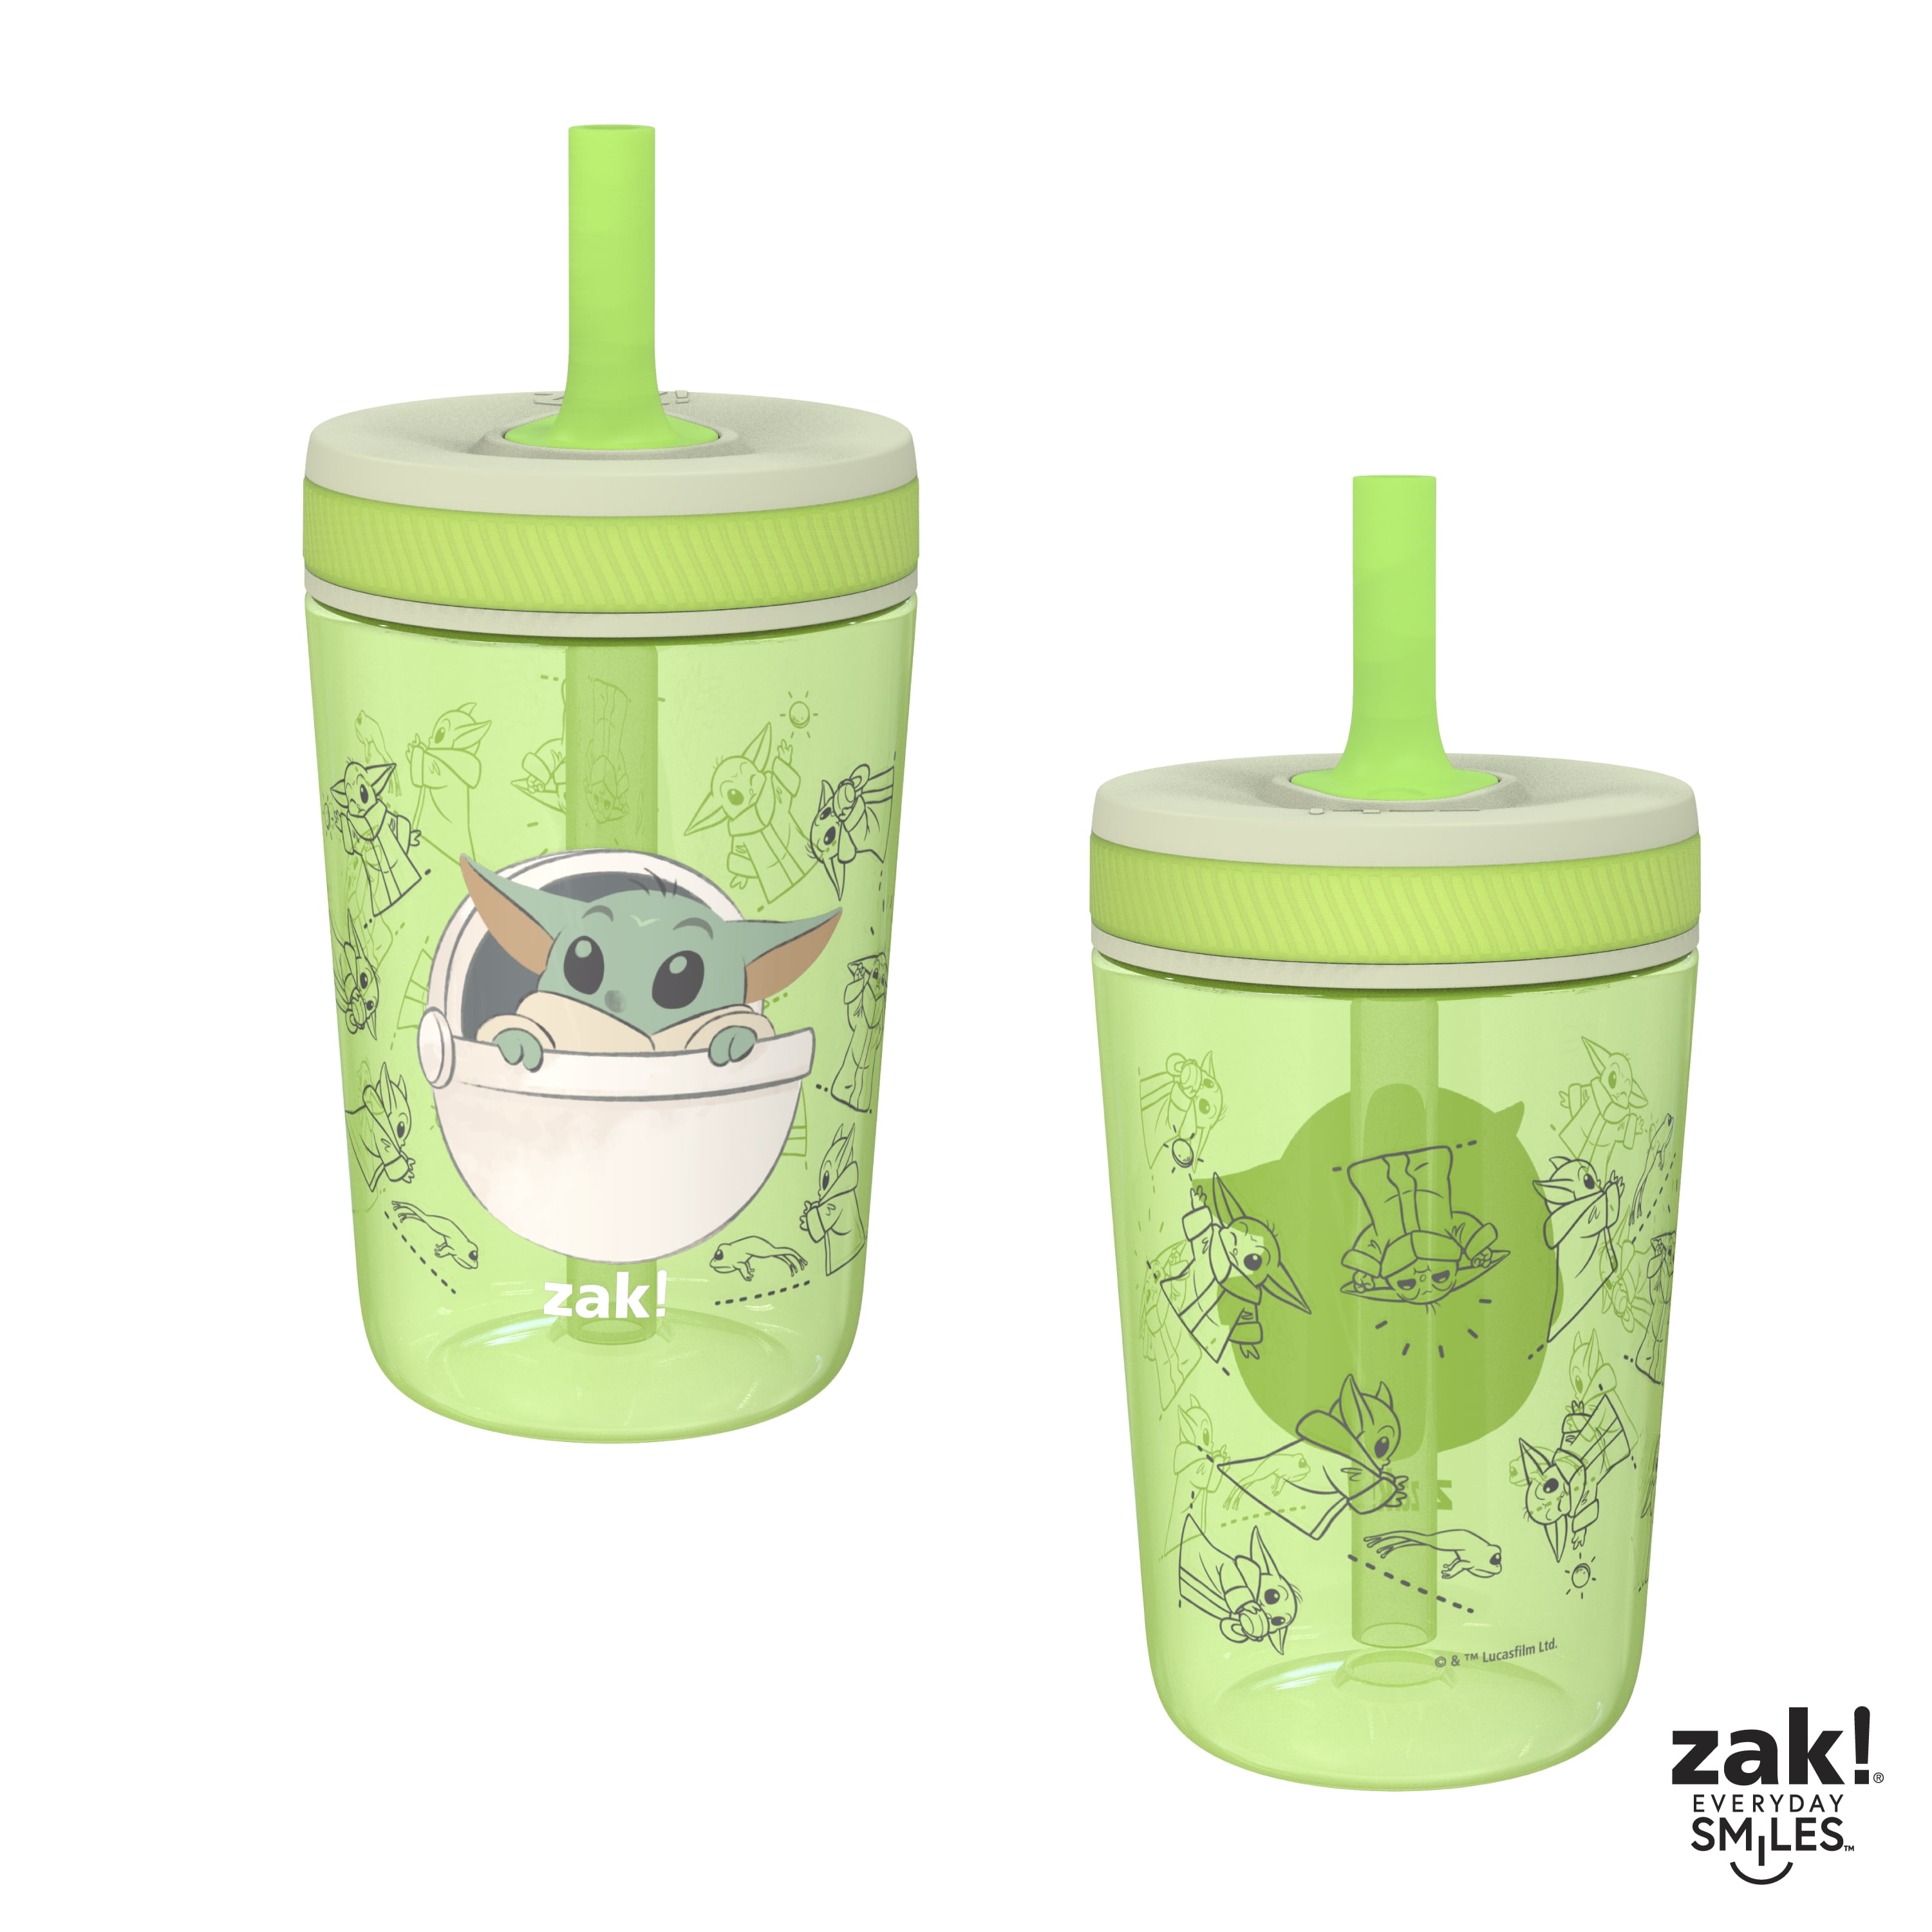 Zak Star Wars The Mandalorian Kelso Toddler Cups For Travel or At Home, 15oz 2-Pack Durable Plastic With Leak-Proof Design is Perfect For Kids (Baby Yoda, Grogu) - Walmart.com